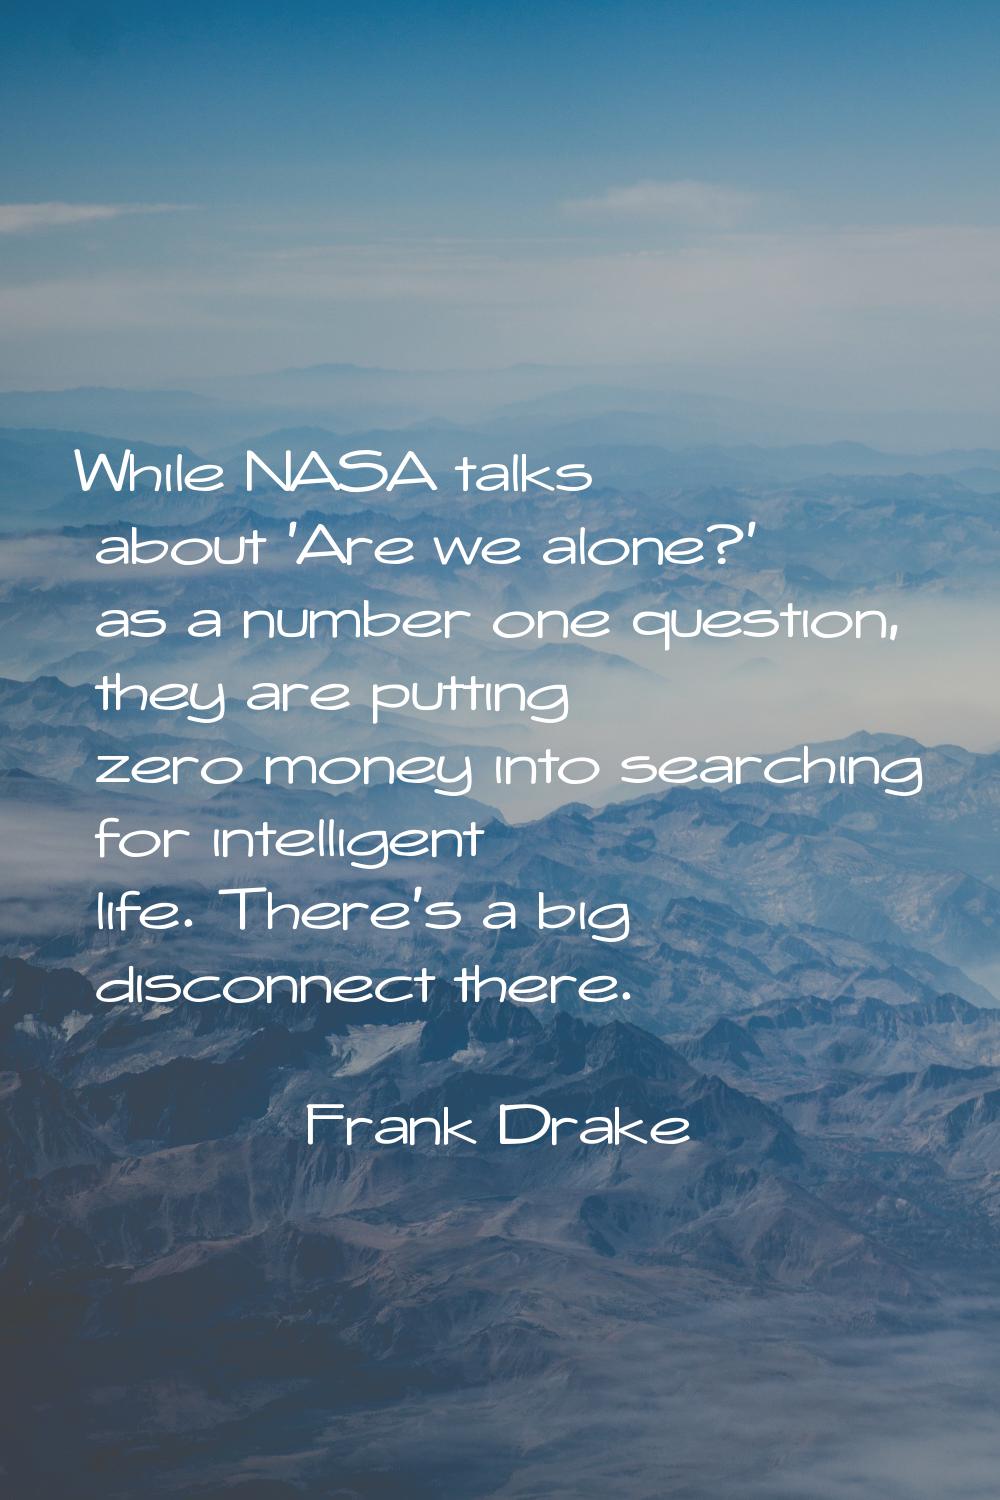 While NASA talks about 'Are we alone?' as a number one question, they are putting zero money into s